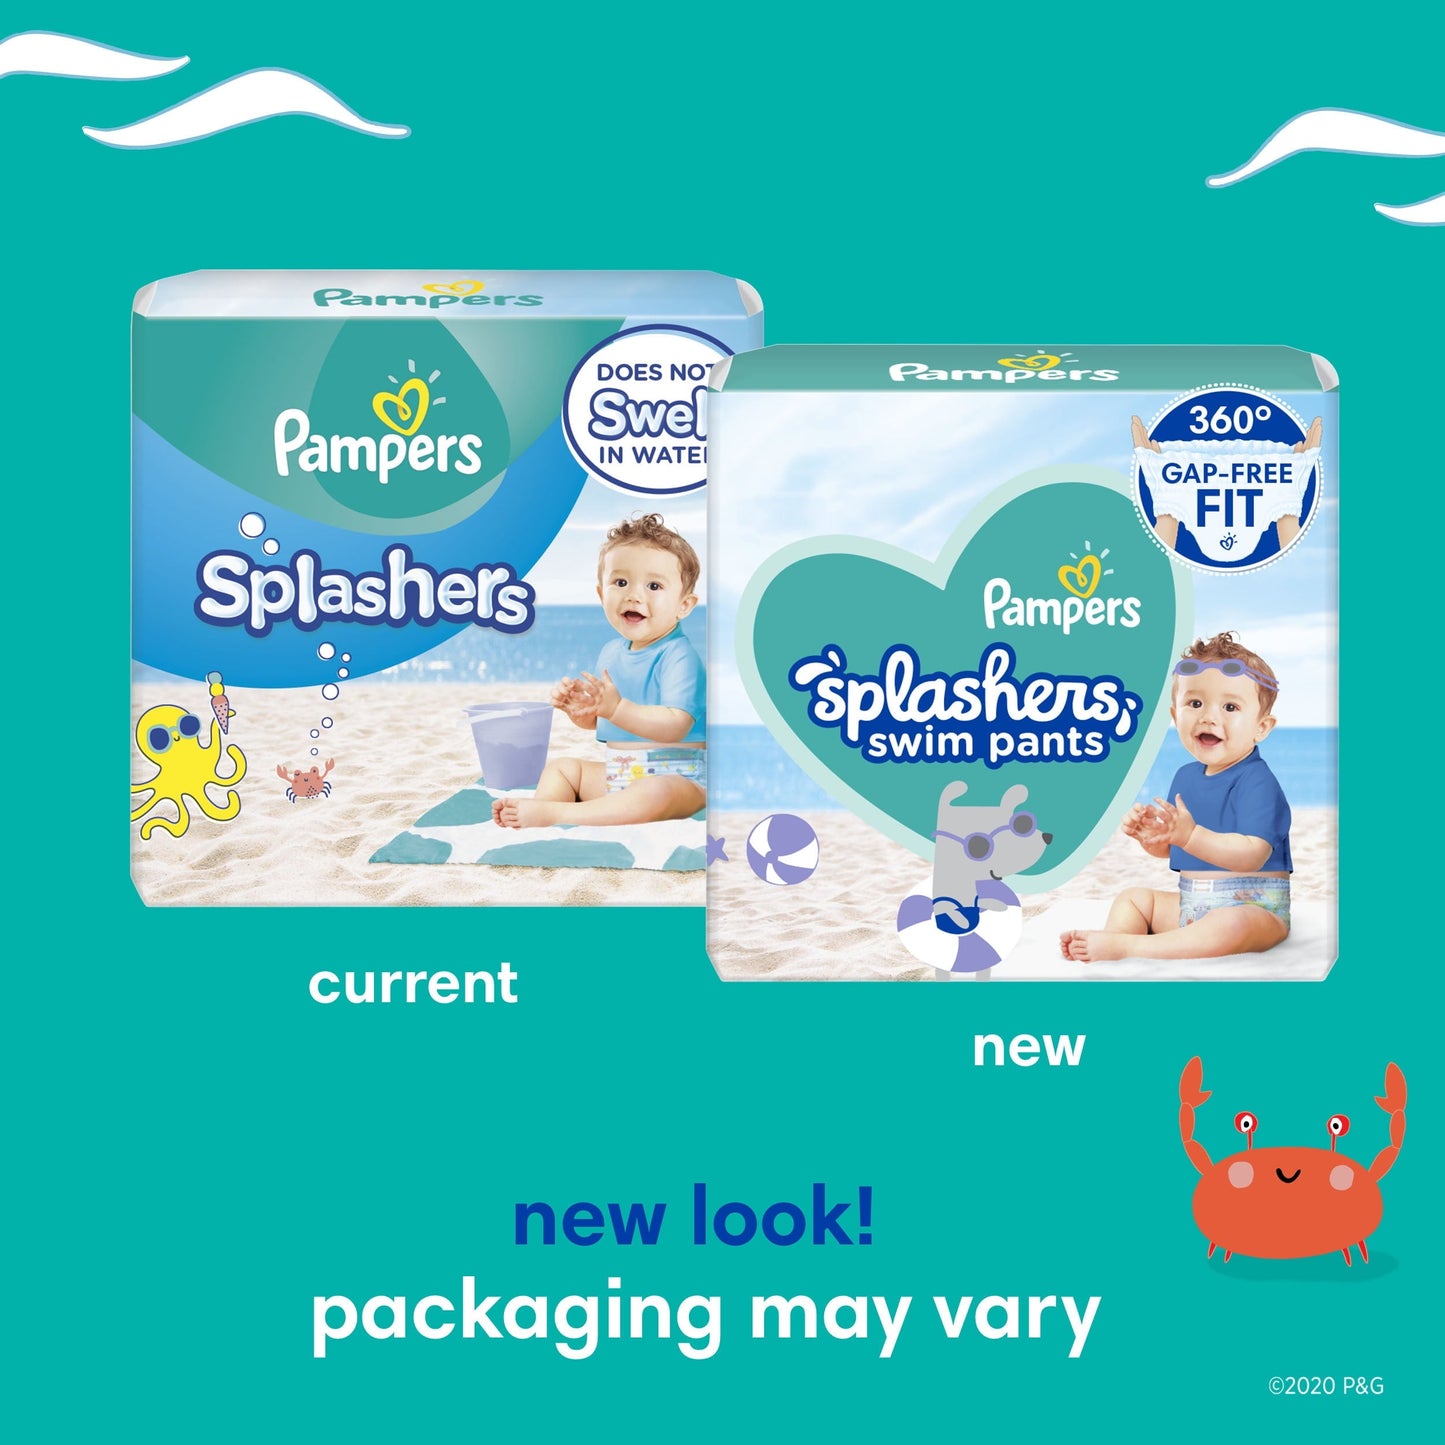 Pampers Splashers Swim Diapers Size LG, 17 Count